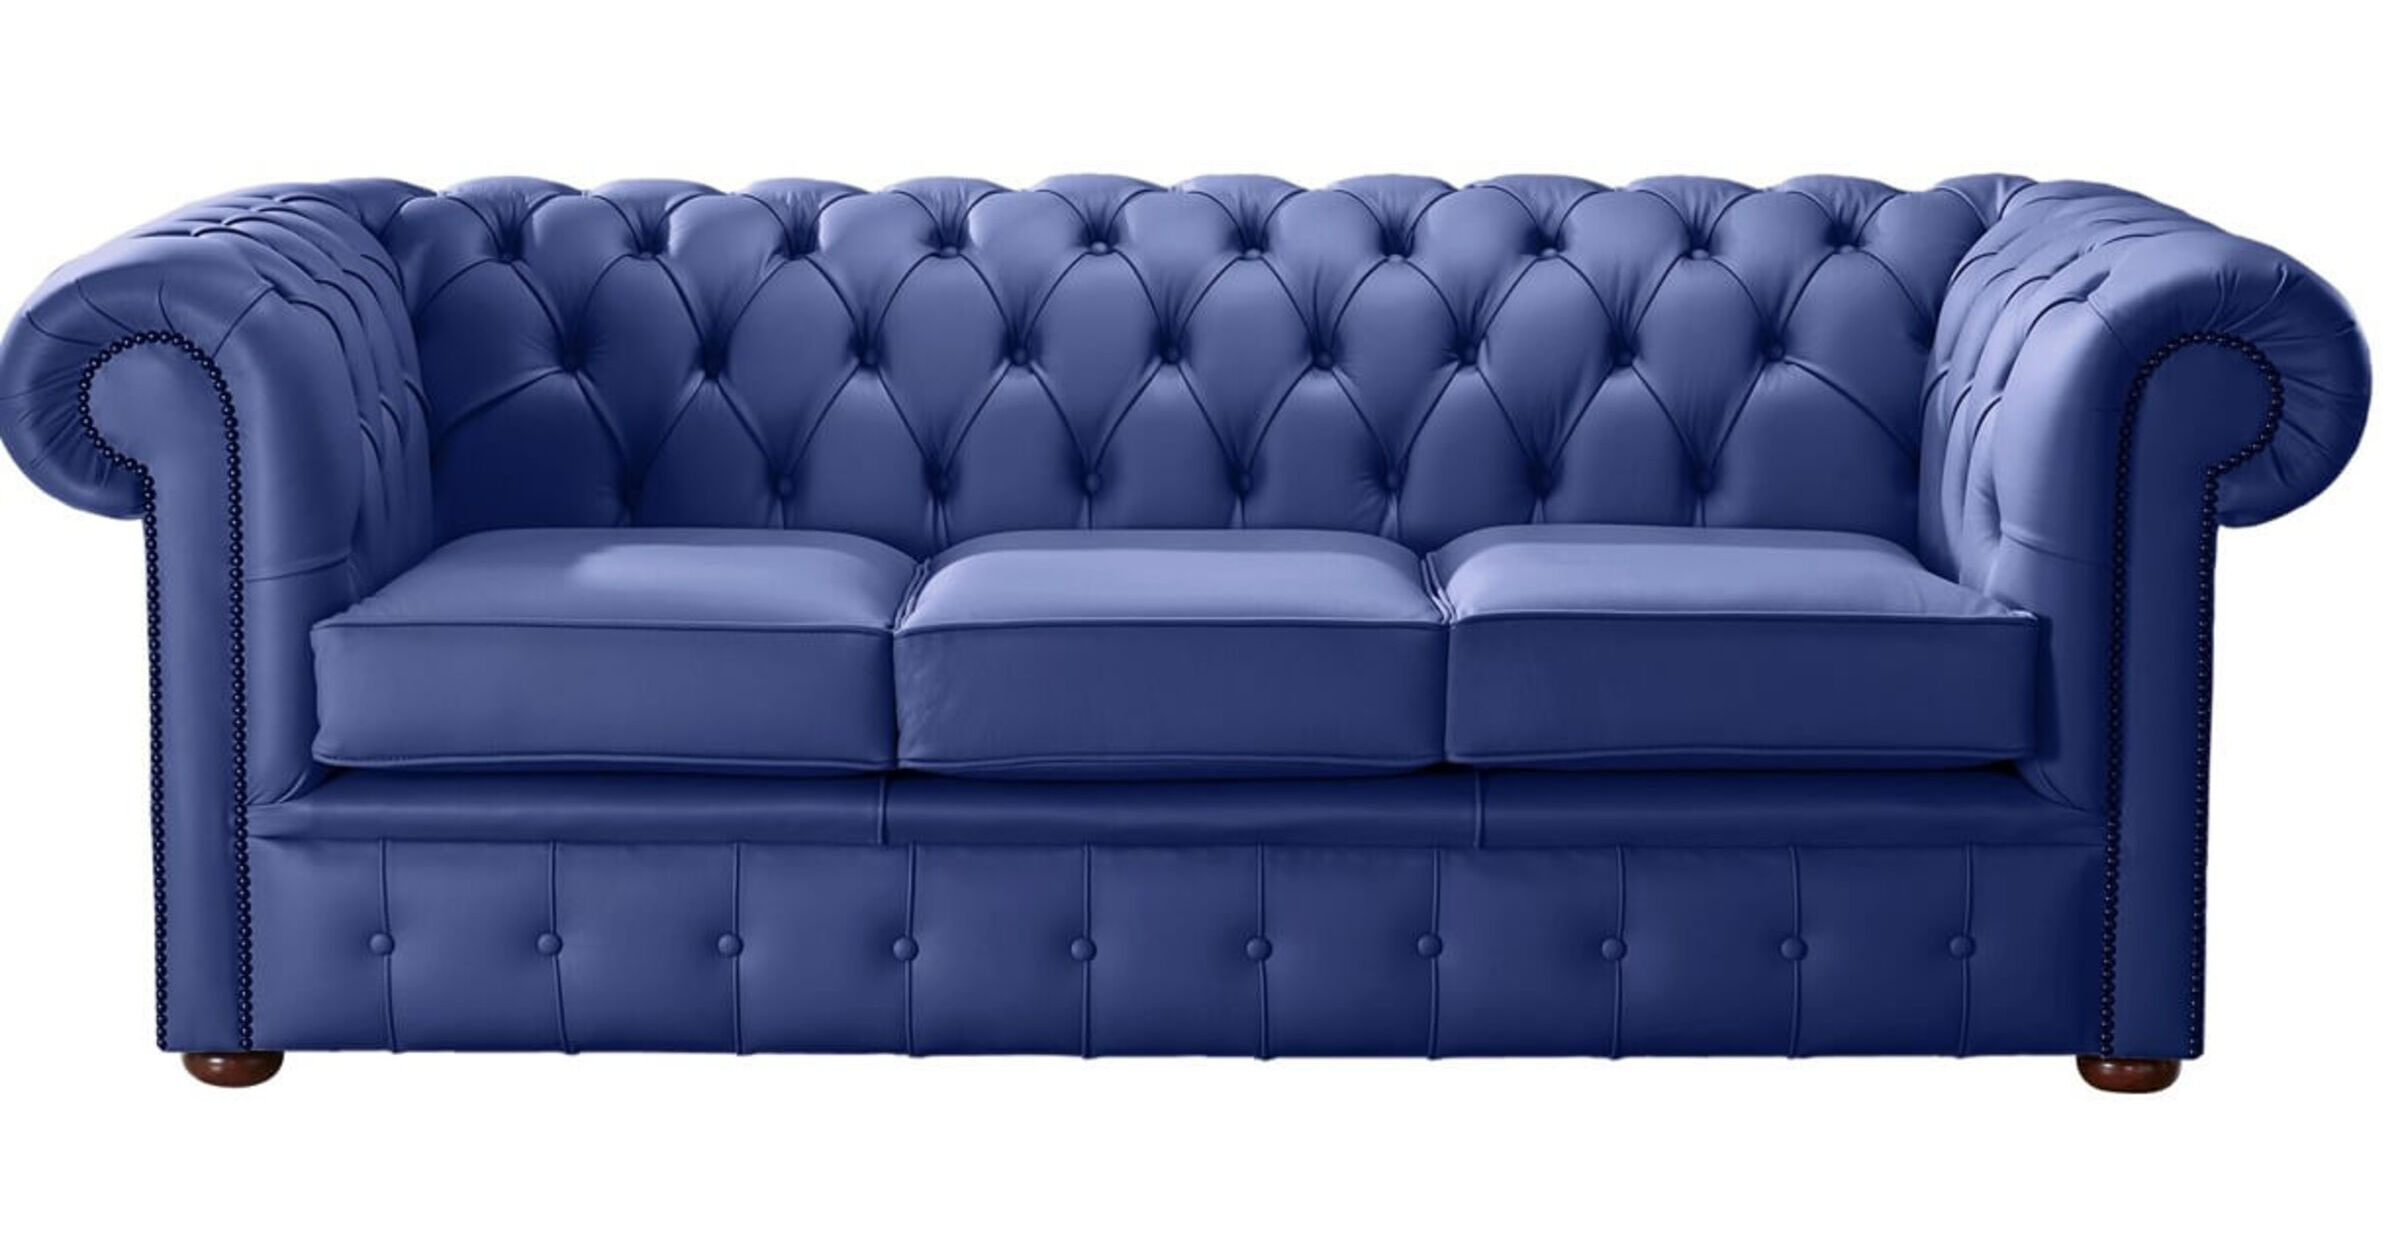 blue leather chesterfield sofa uk